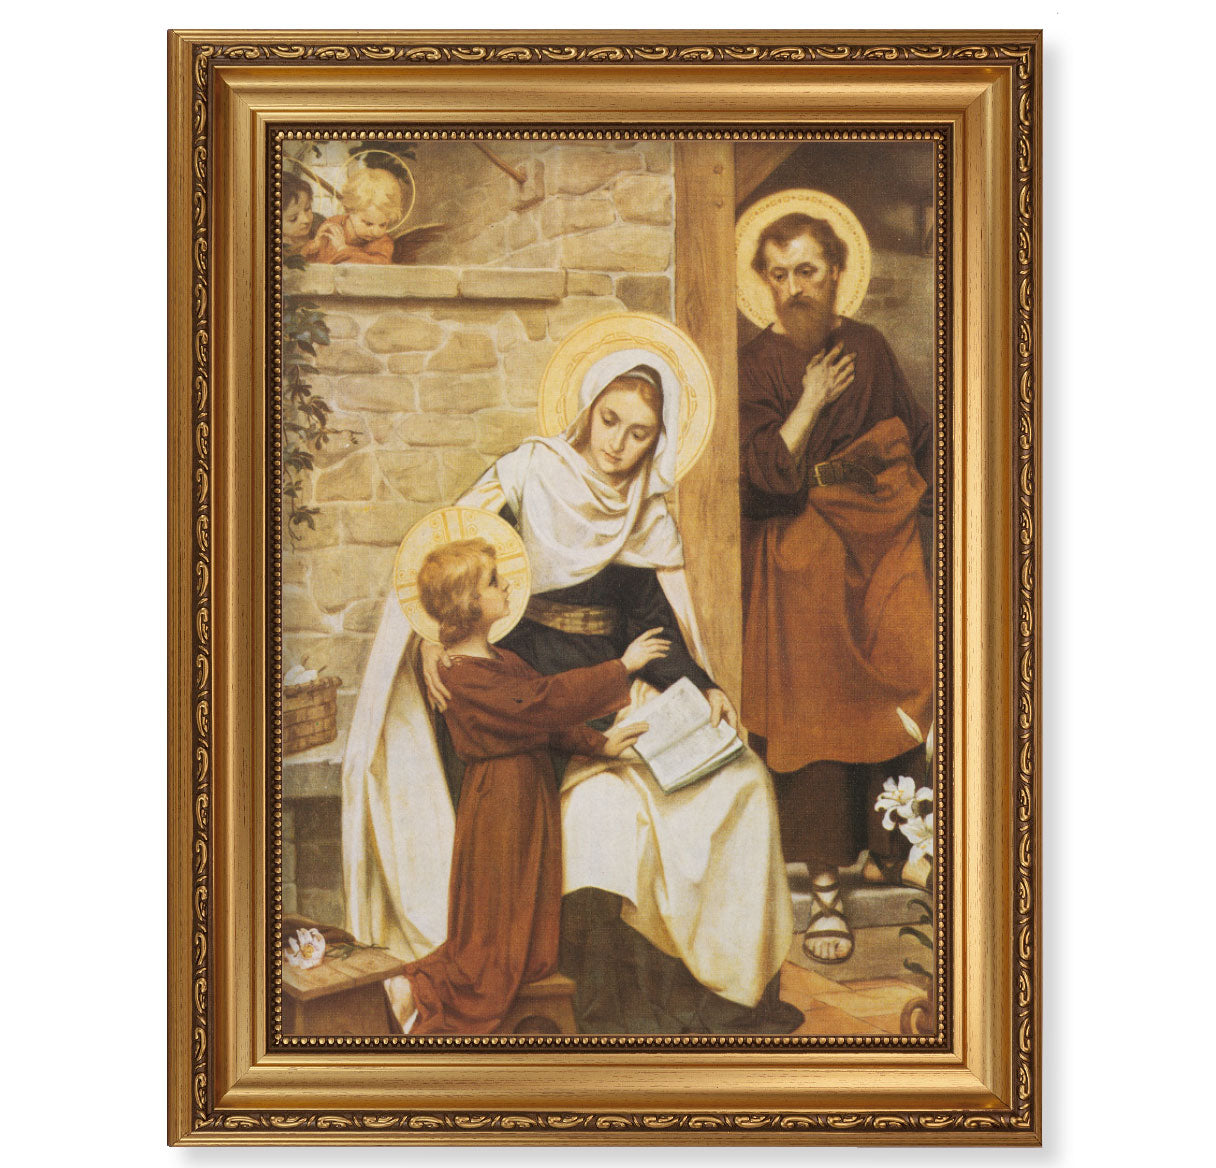 Holy Family in Nazareth Antique Picture Framed Wall Art Decor Extra Large, Antique Gold-Leaf Frame with Acanthus-Leaf Trim and Beaded Lip